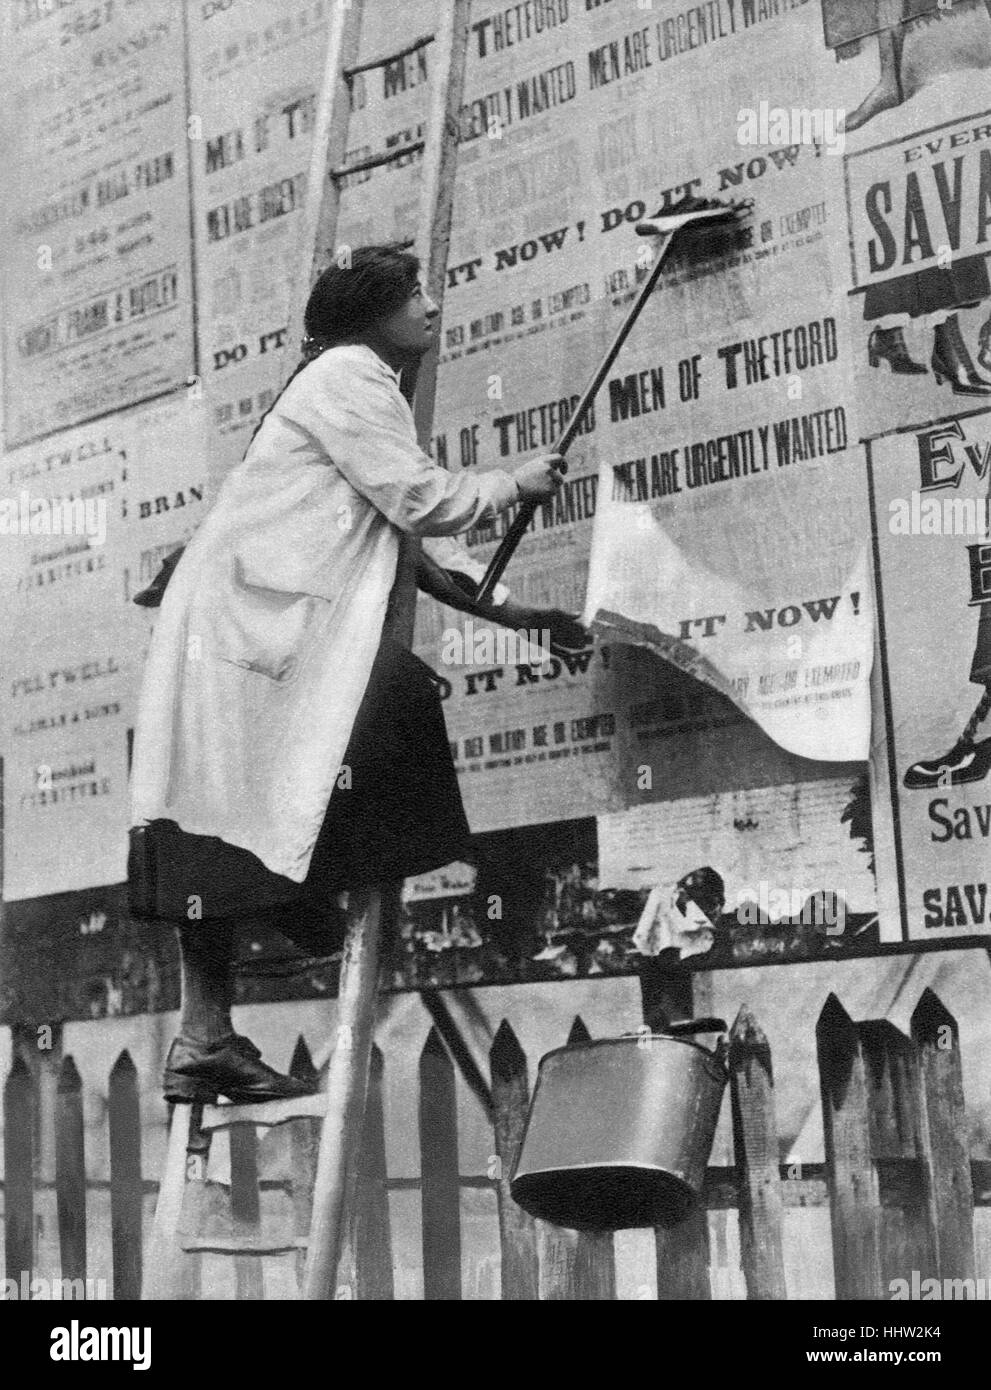 Woman putting up recruitment posters with the slogan 'Do it now! Men are urgently wanted' during the First World War, 1918 Stock Photo